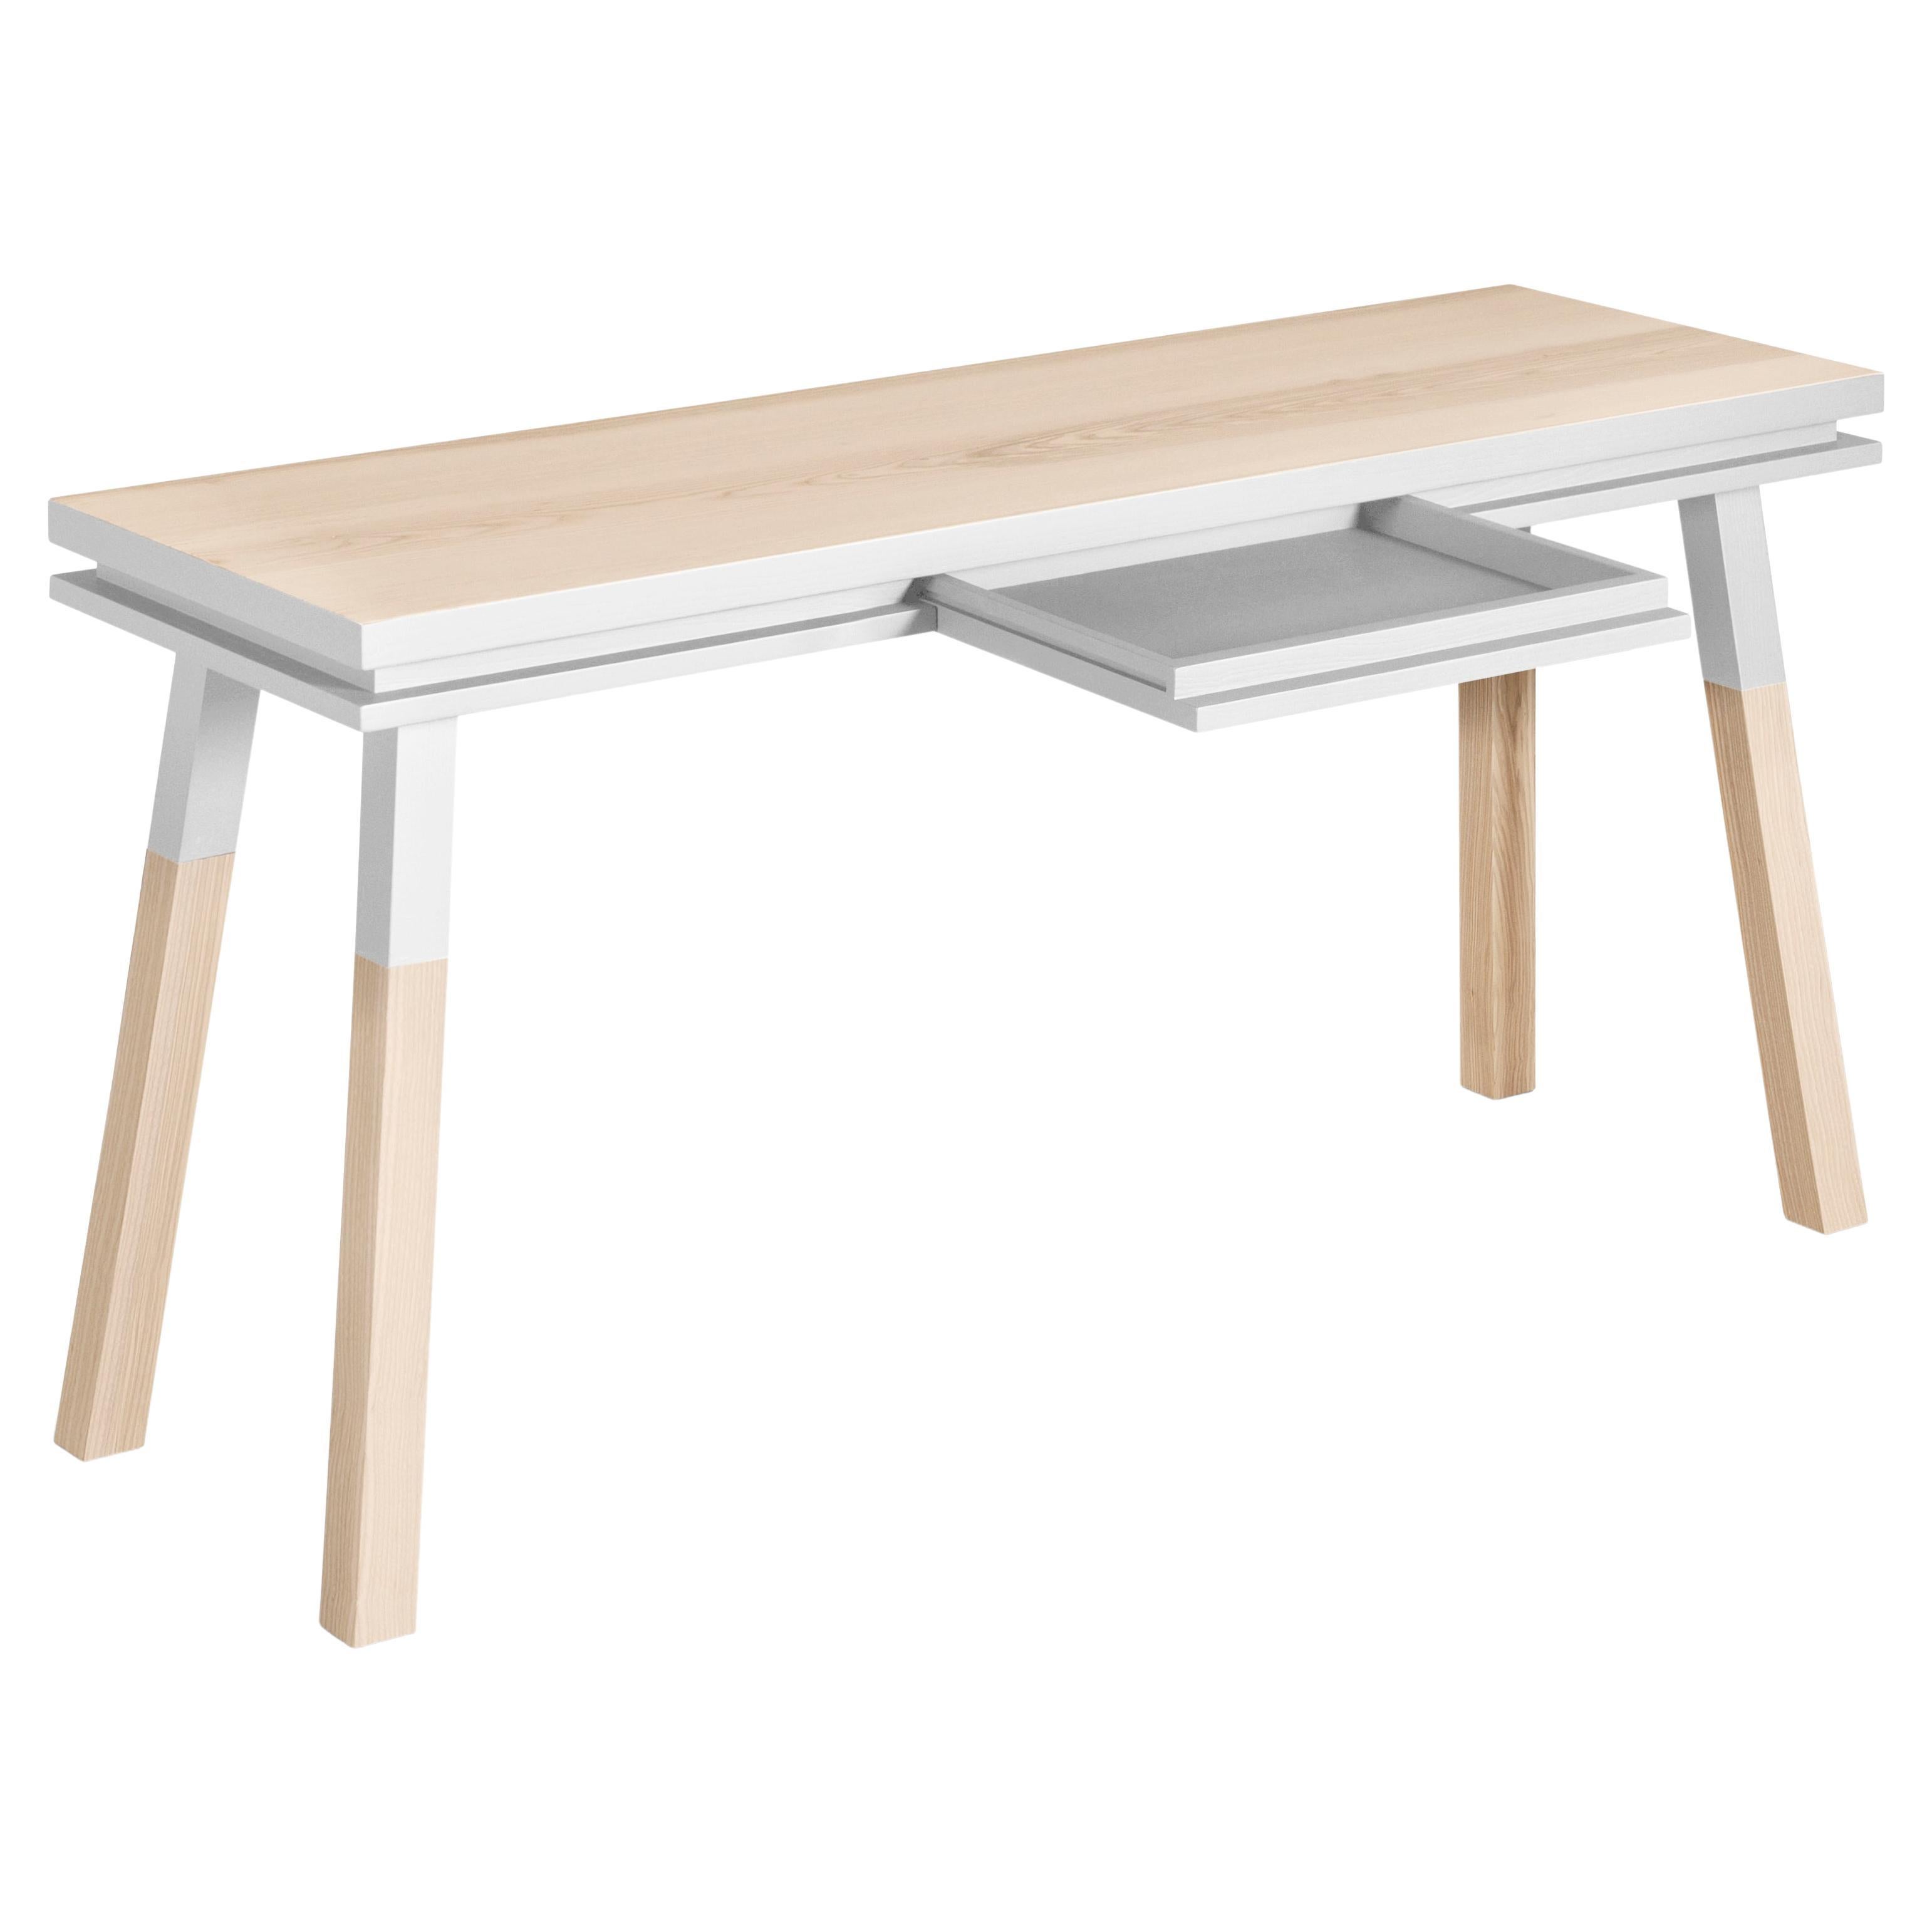 White writing table in solid wood, design by Eric Gizard, Paris - French craft 